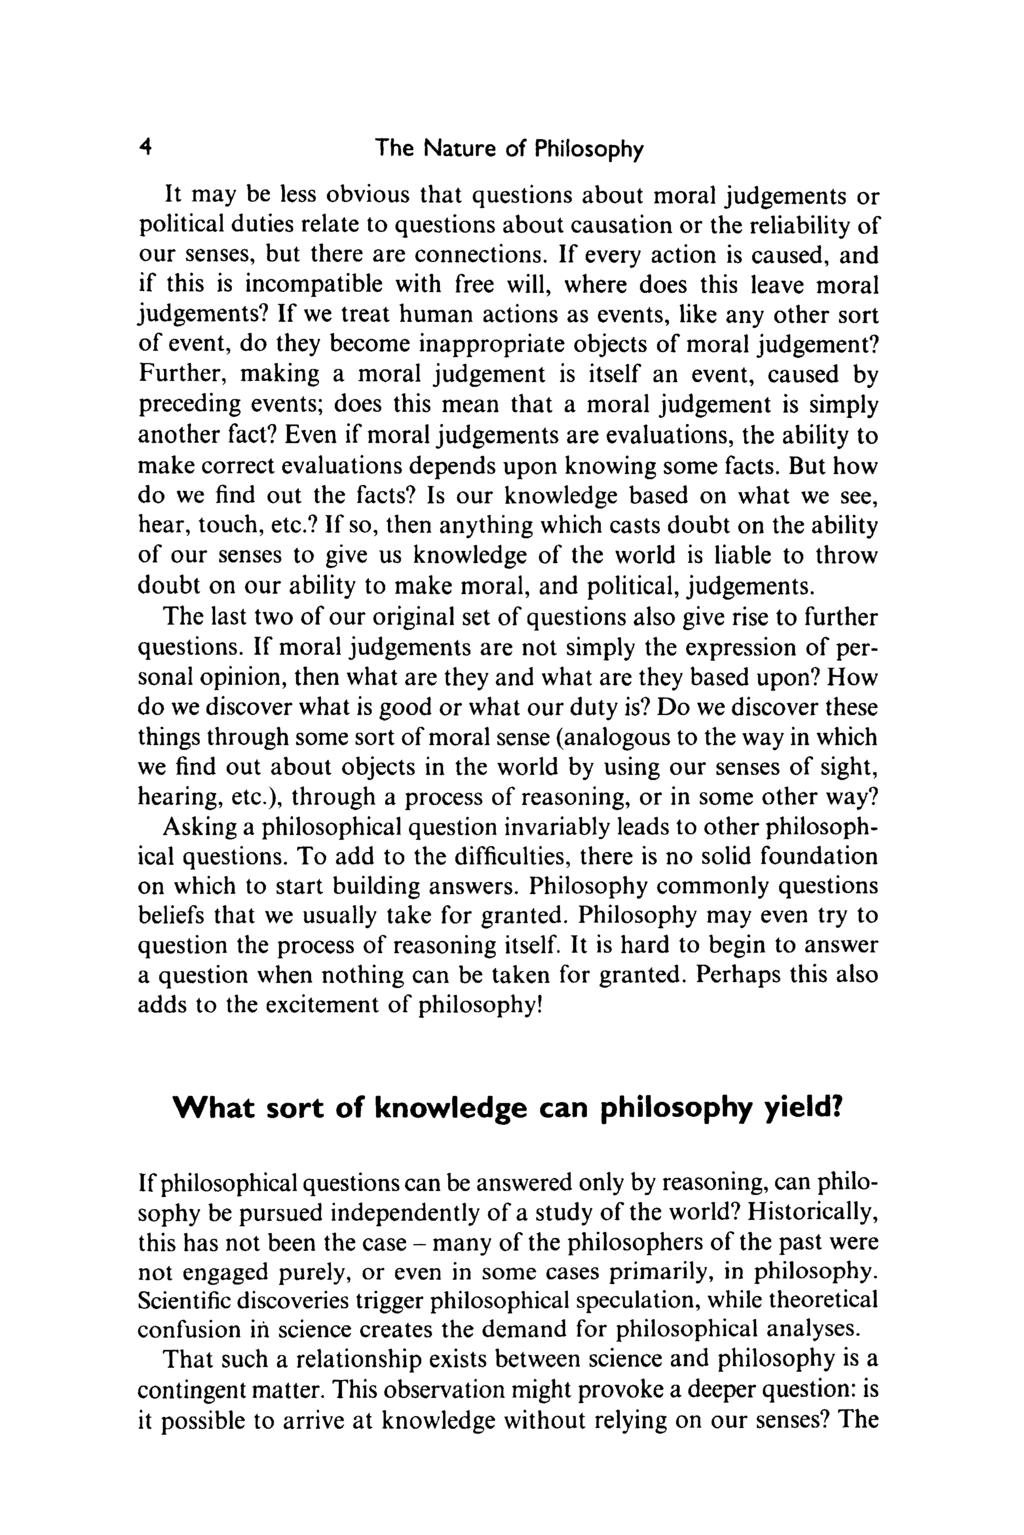 4 The Nature of Philosophy It may be less obvious that questions about moral judgements or political duties relate to questions about causation or the reliability of our senses, but there are